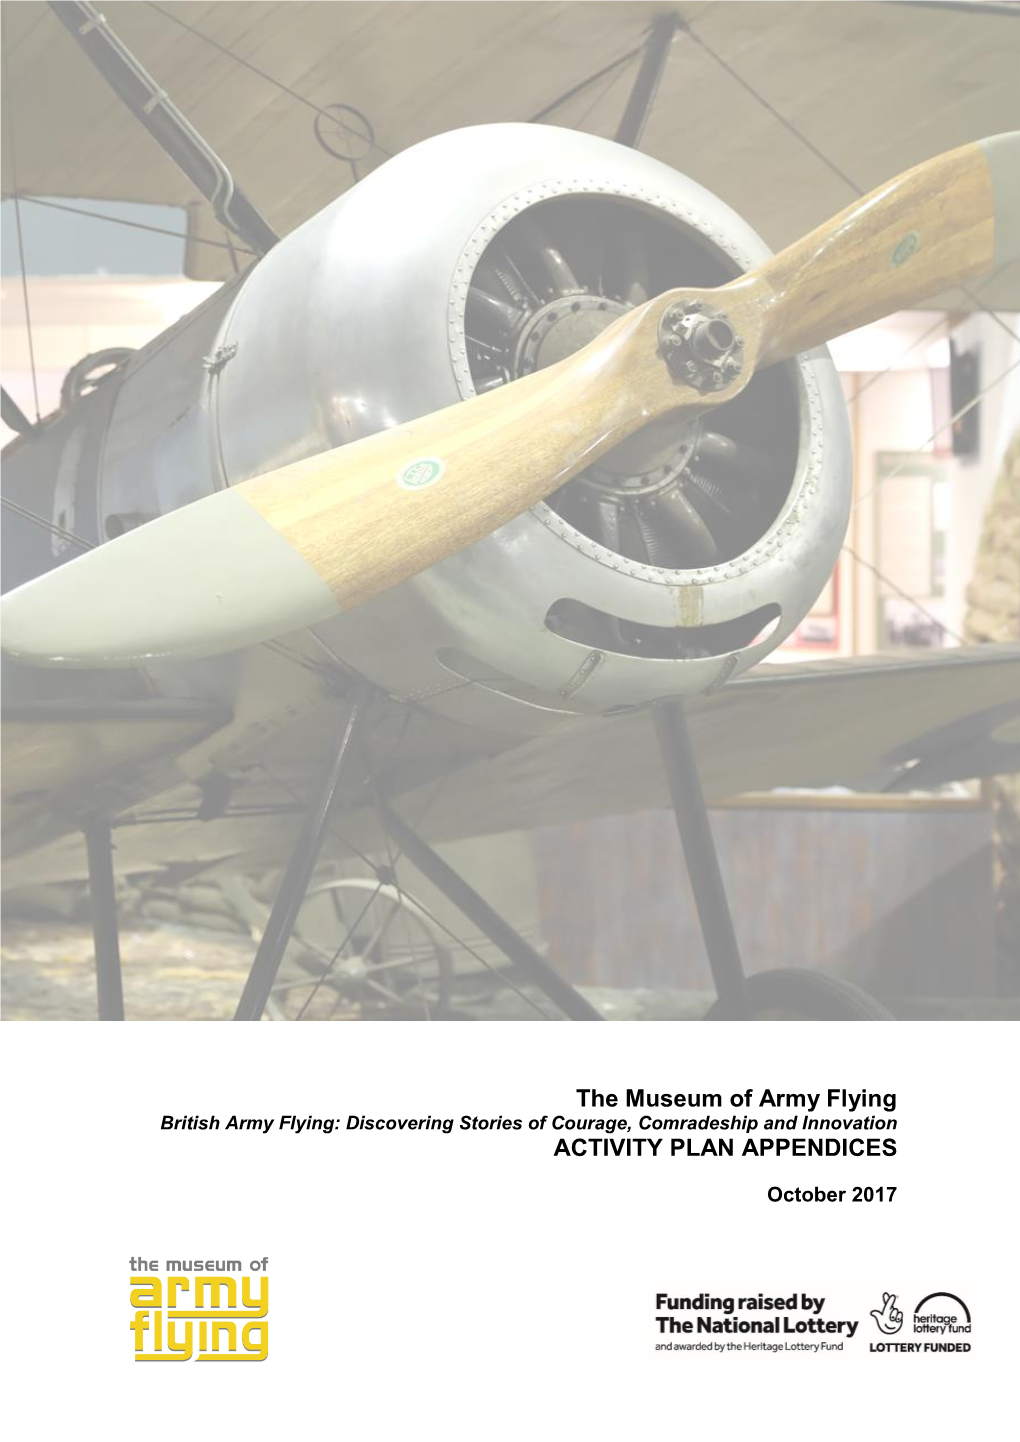 The Museum of Army Flying ACTIVITY PLAN APPENDICES